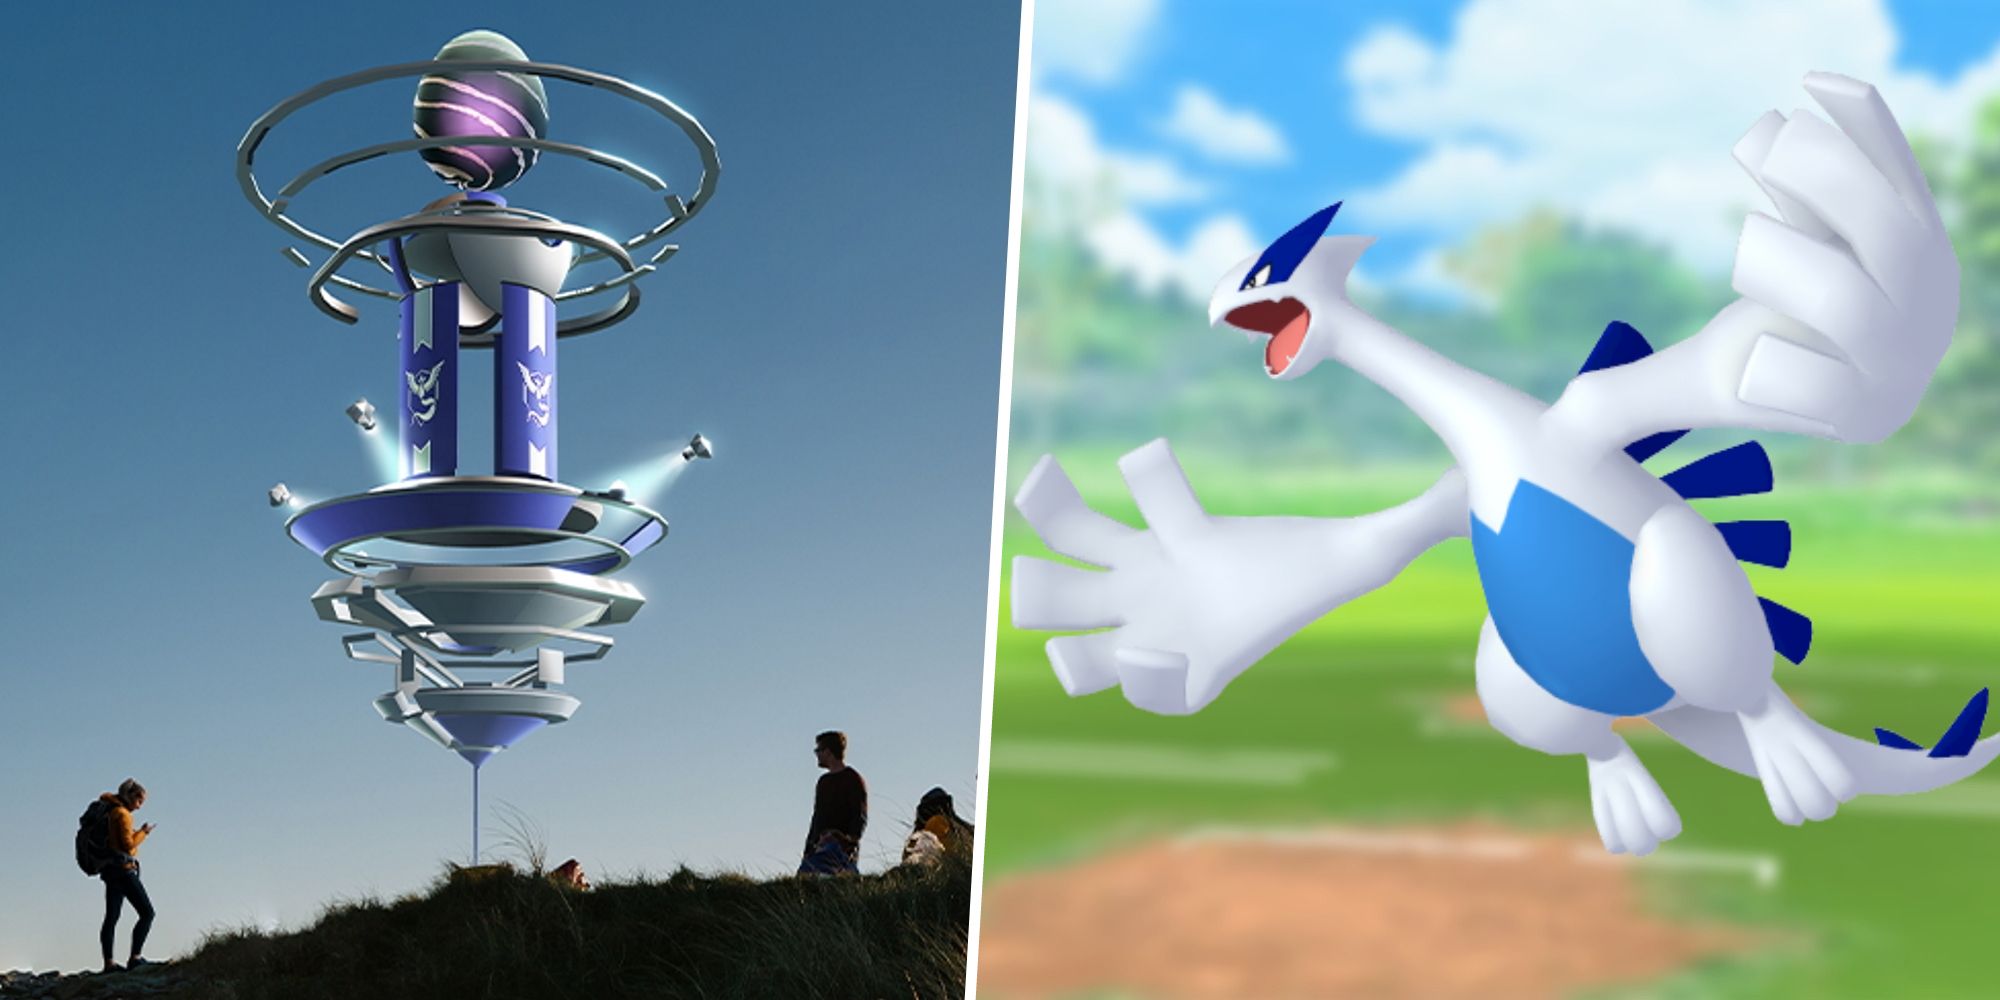 Pokémon Go Lugia guide: best counters for the raid - Video Games